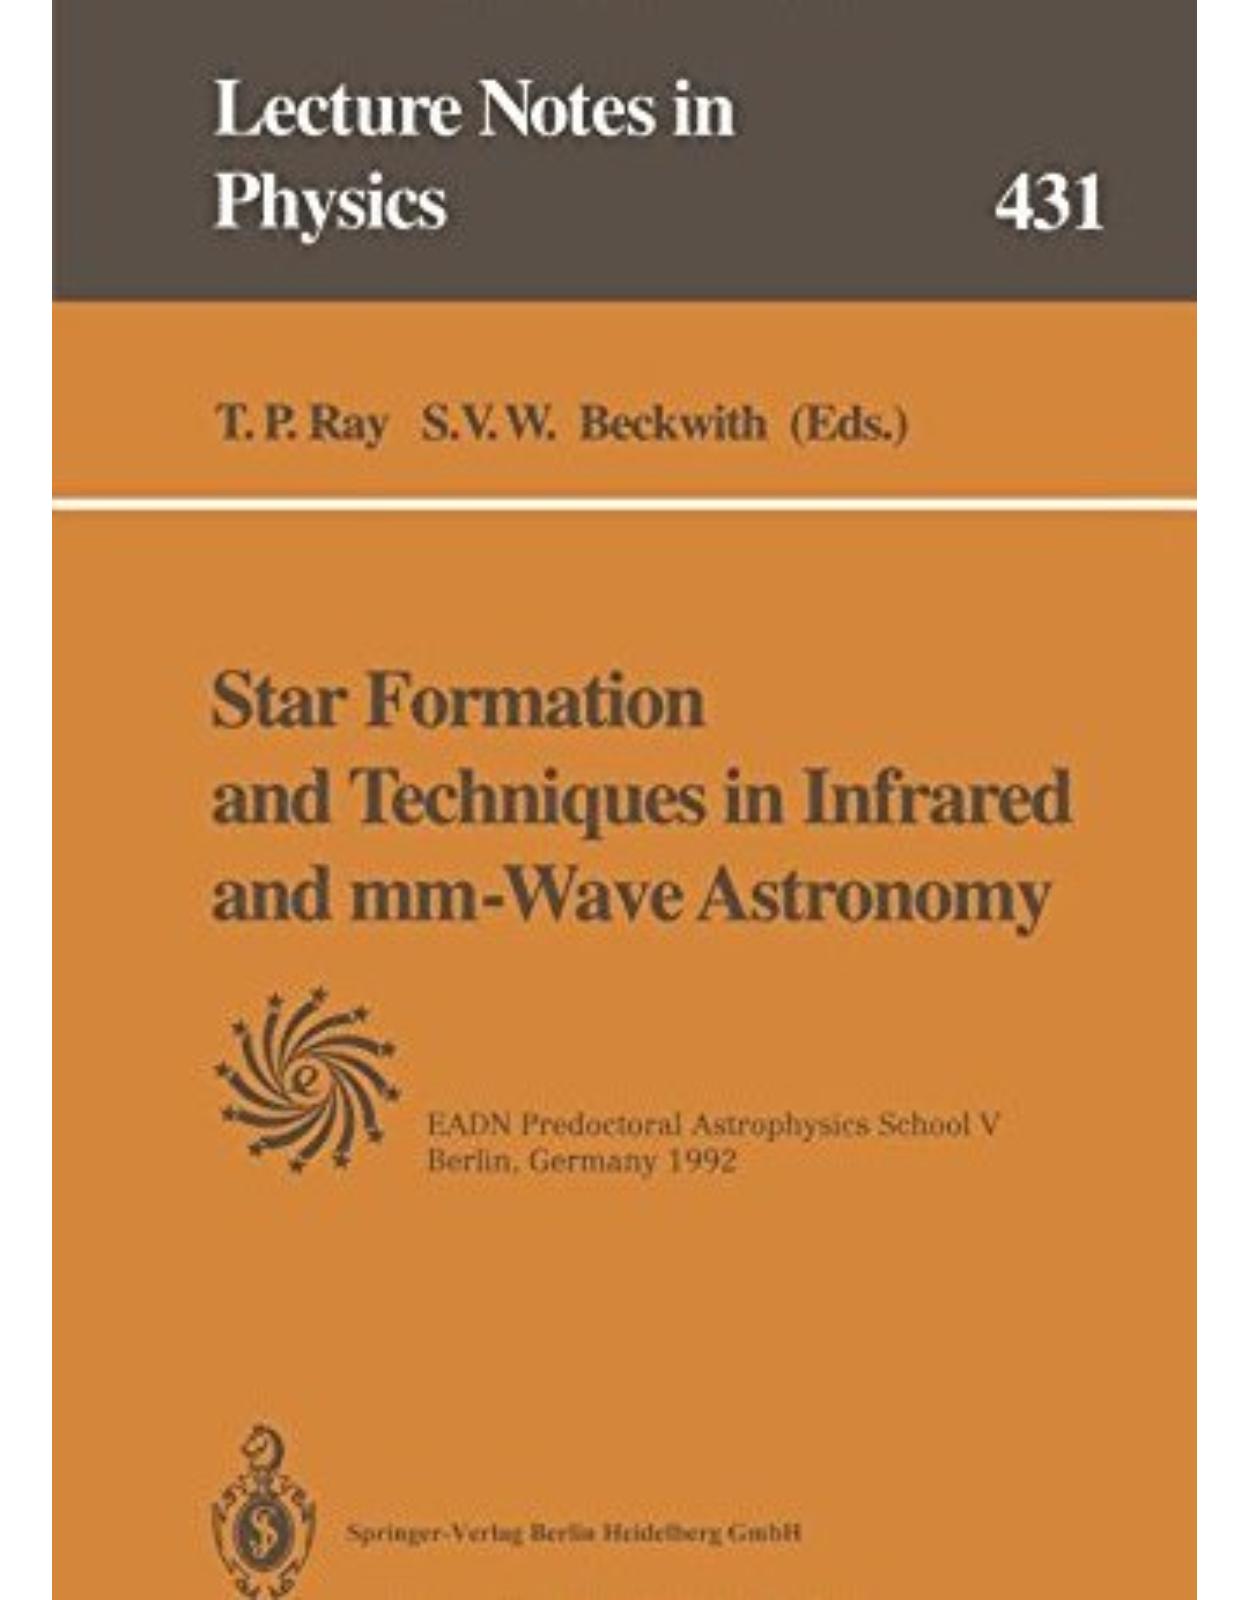 Star Formation and Techniques in Infrared and mmWave Astronomy